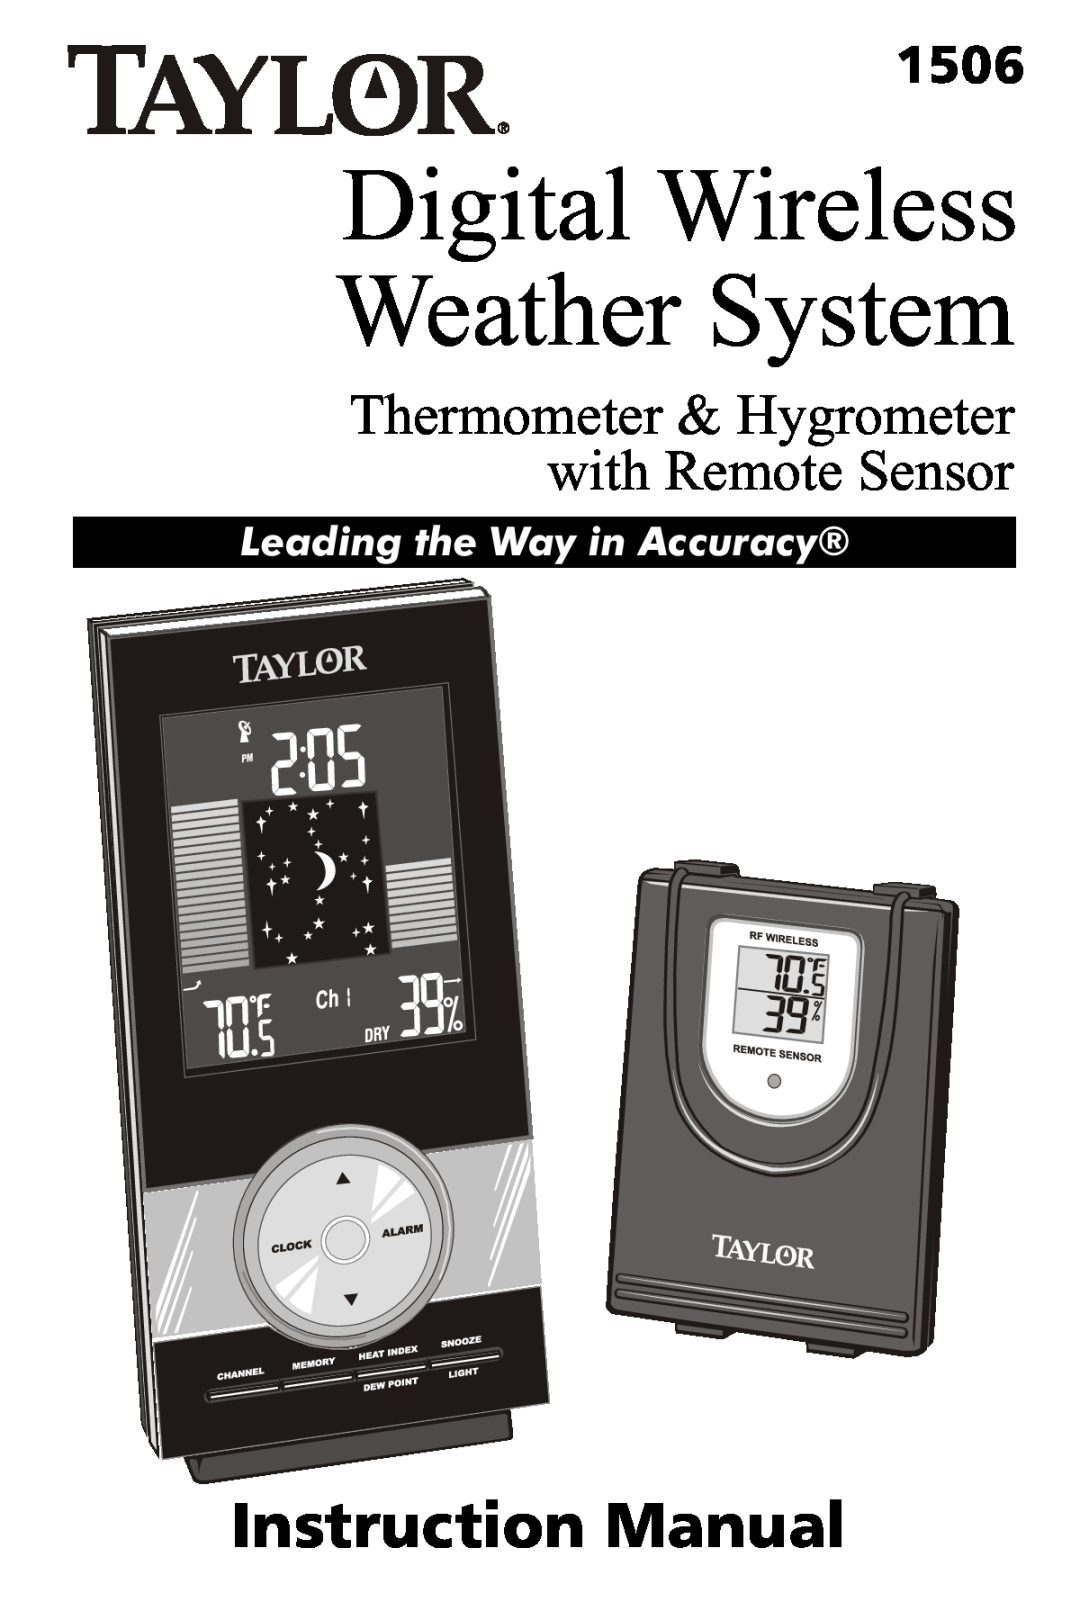 Taylor 1506 instruction manual Digital Wireless Weather System, Thermometer & Hygrometer with Remote Sensor 